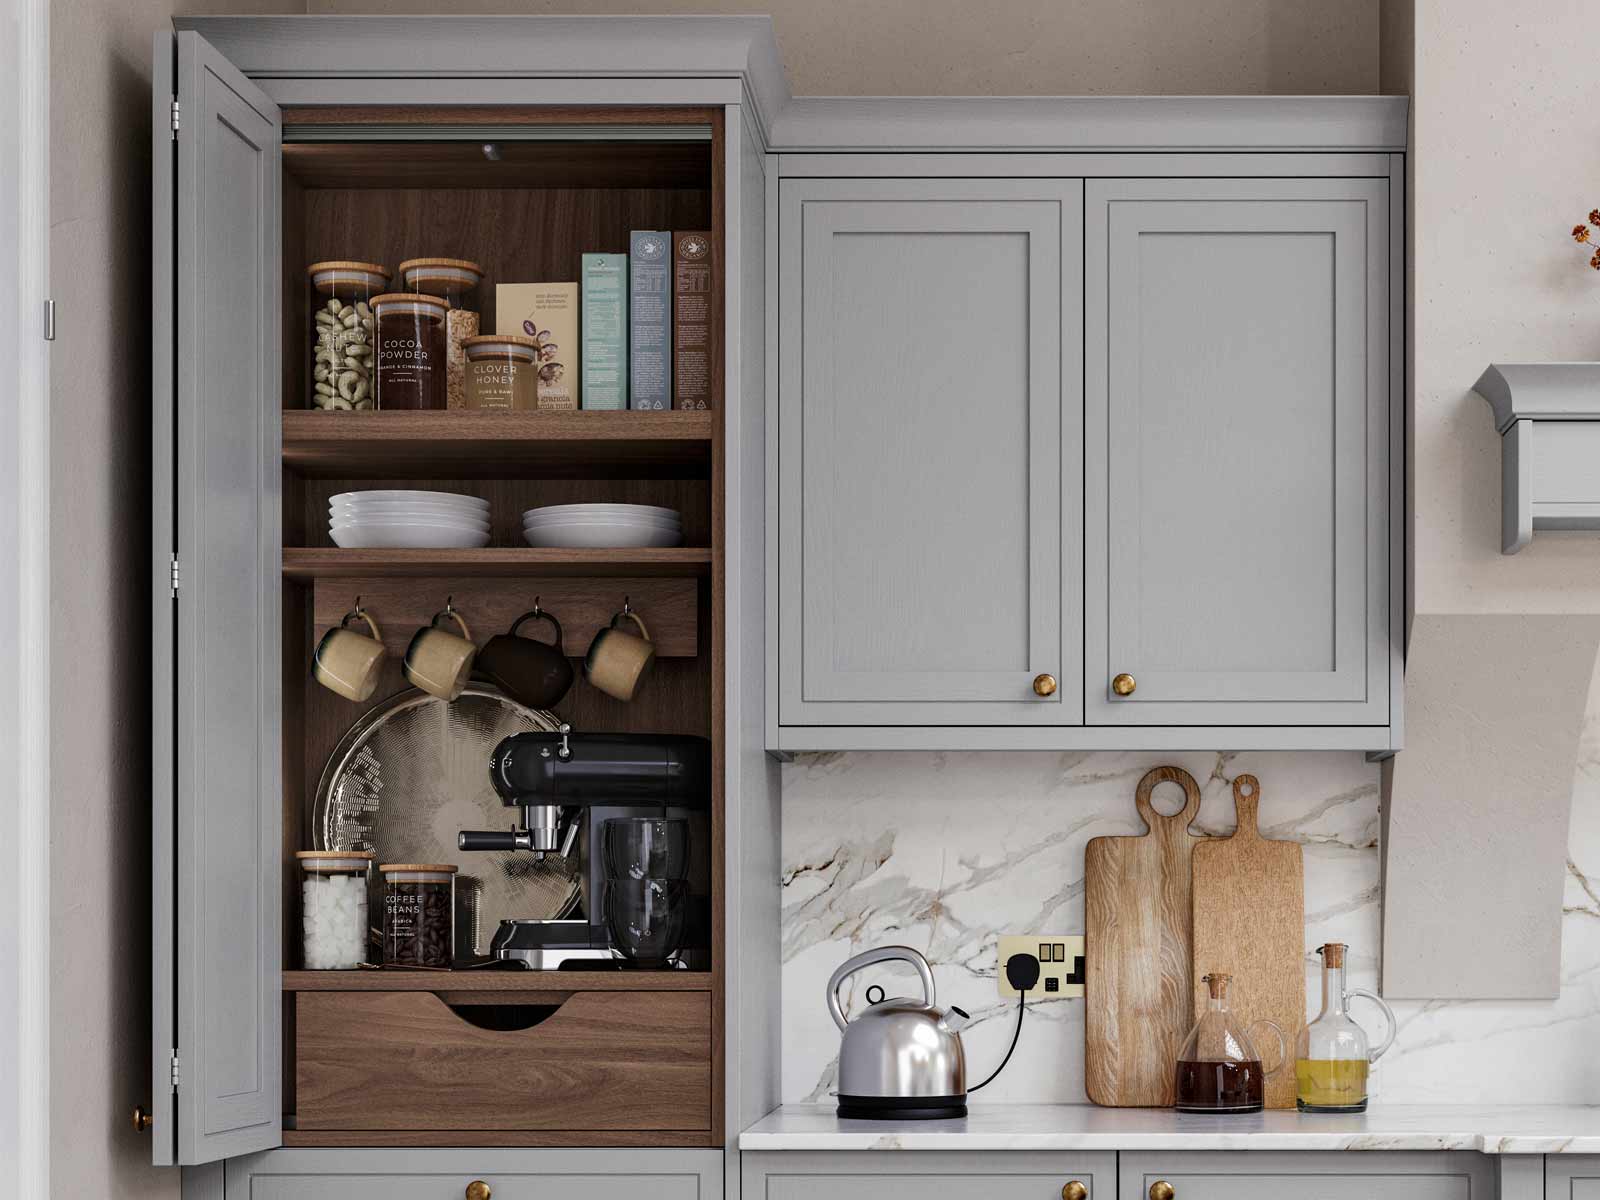 A coffee bar cabinet complete with shelves for a breakfast station